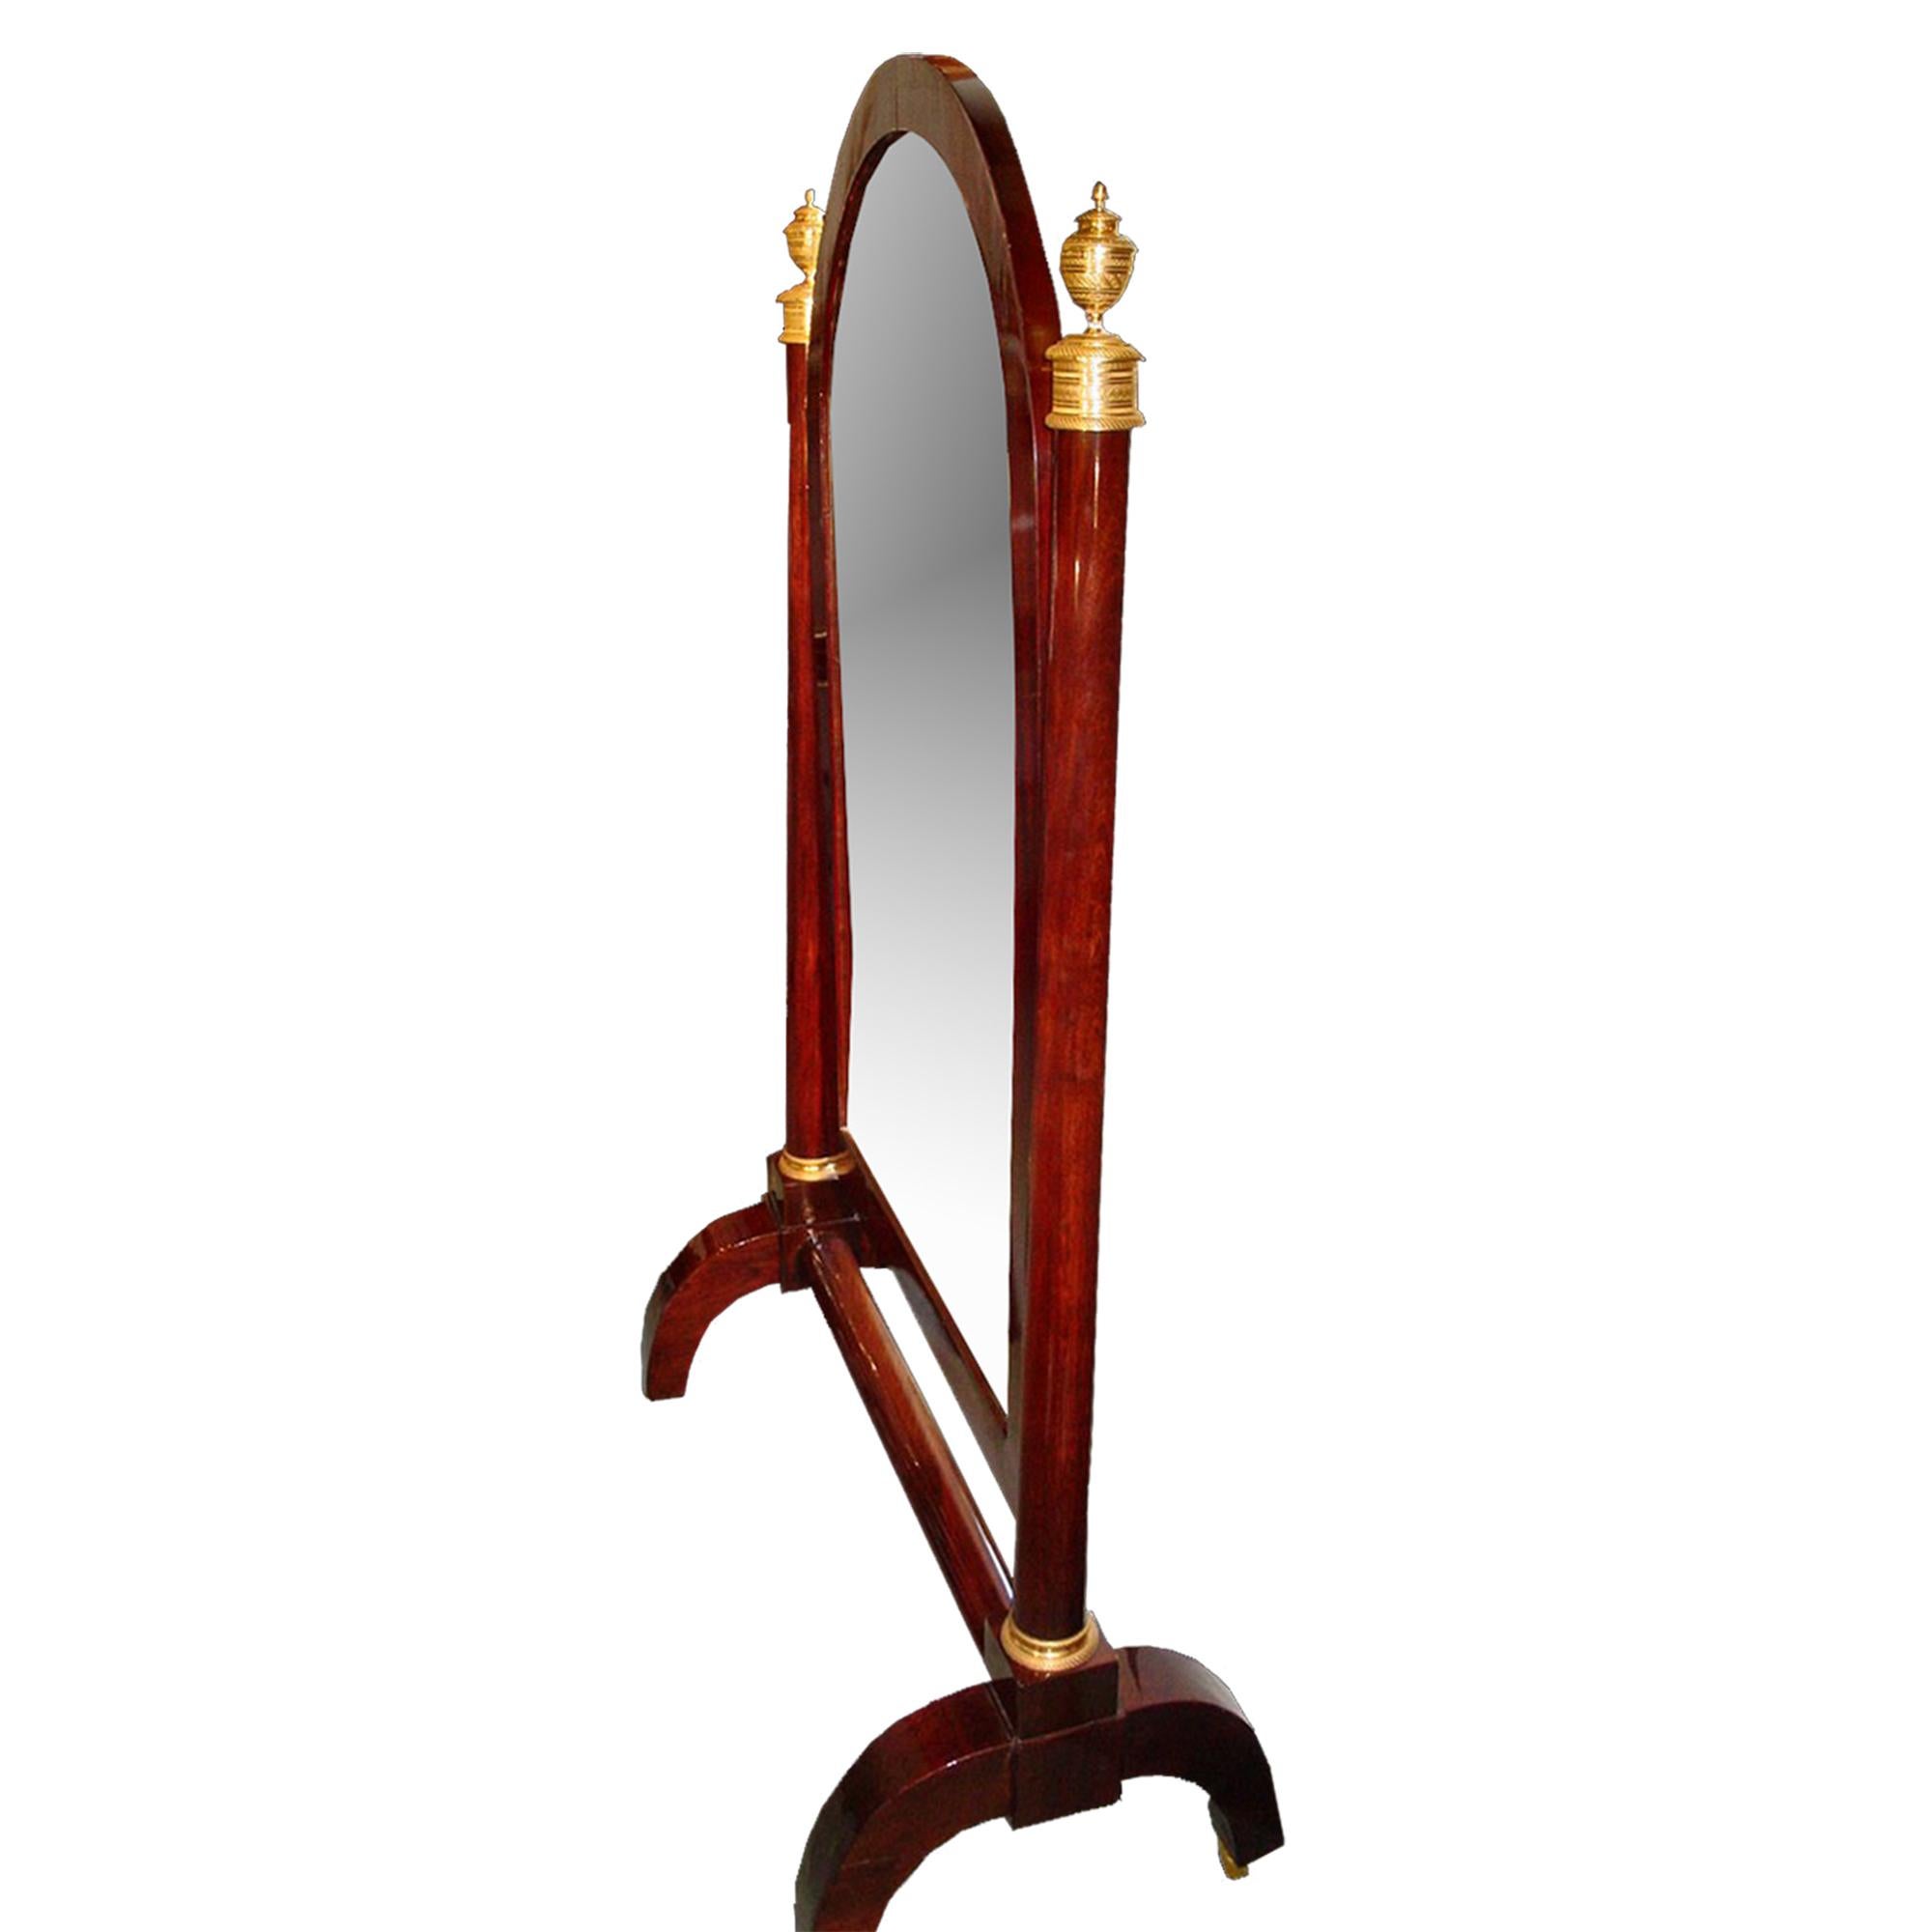 A fine mid-19th century French Neo-Classical st. mahogany Psyche mirror. The whole is raised on four C scrolled legs fitted with ormolu casters joined by a cylindrical stretcher. The mirror in a Cuban veneered frame is held by two cylindrical